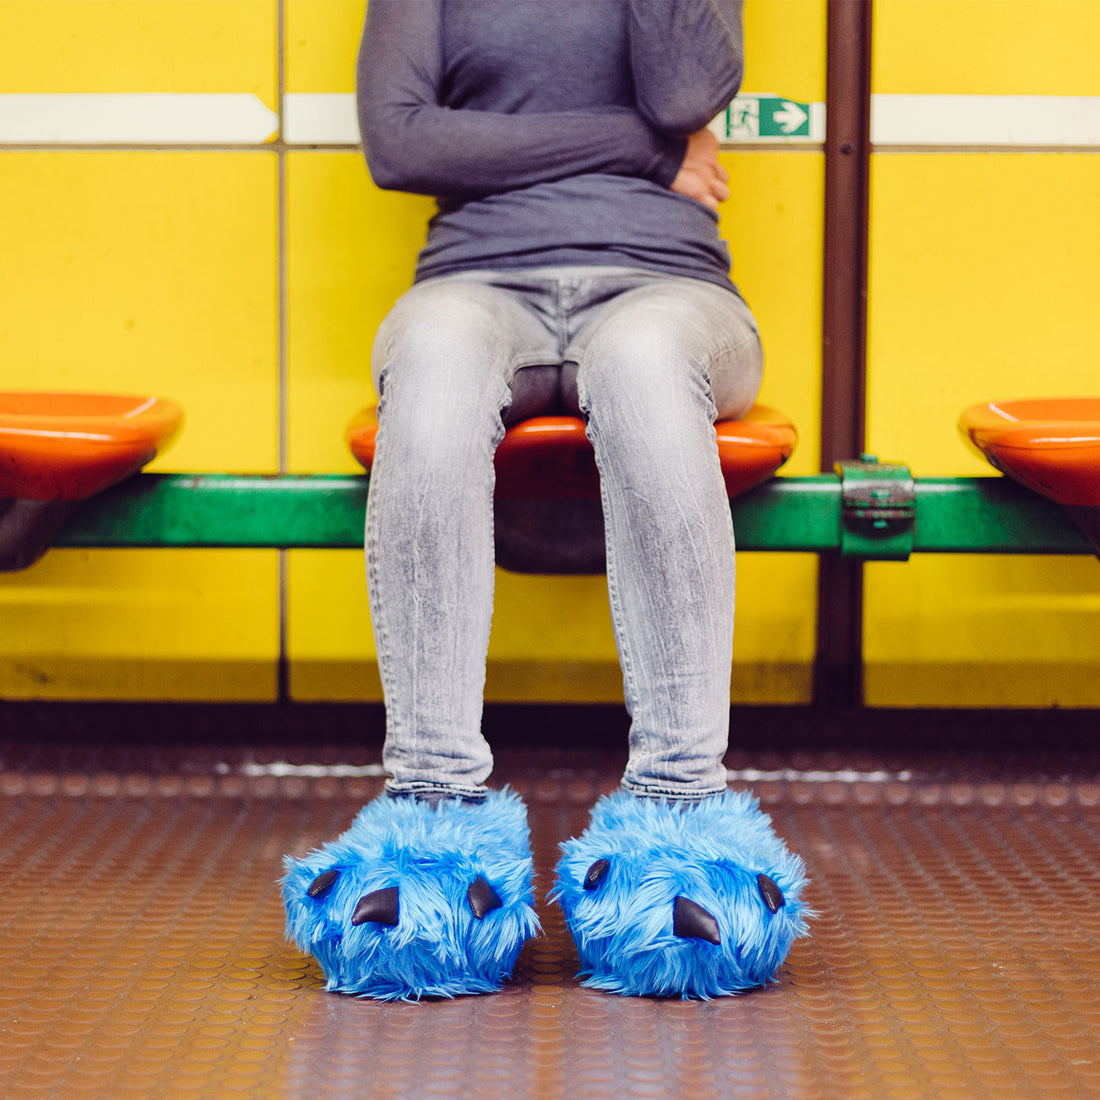 person sittting on bank wearing blue claw slippers